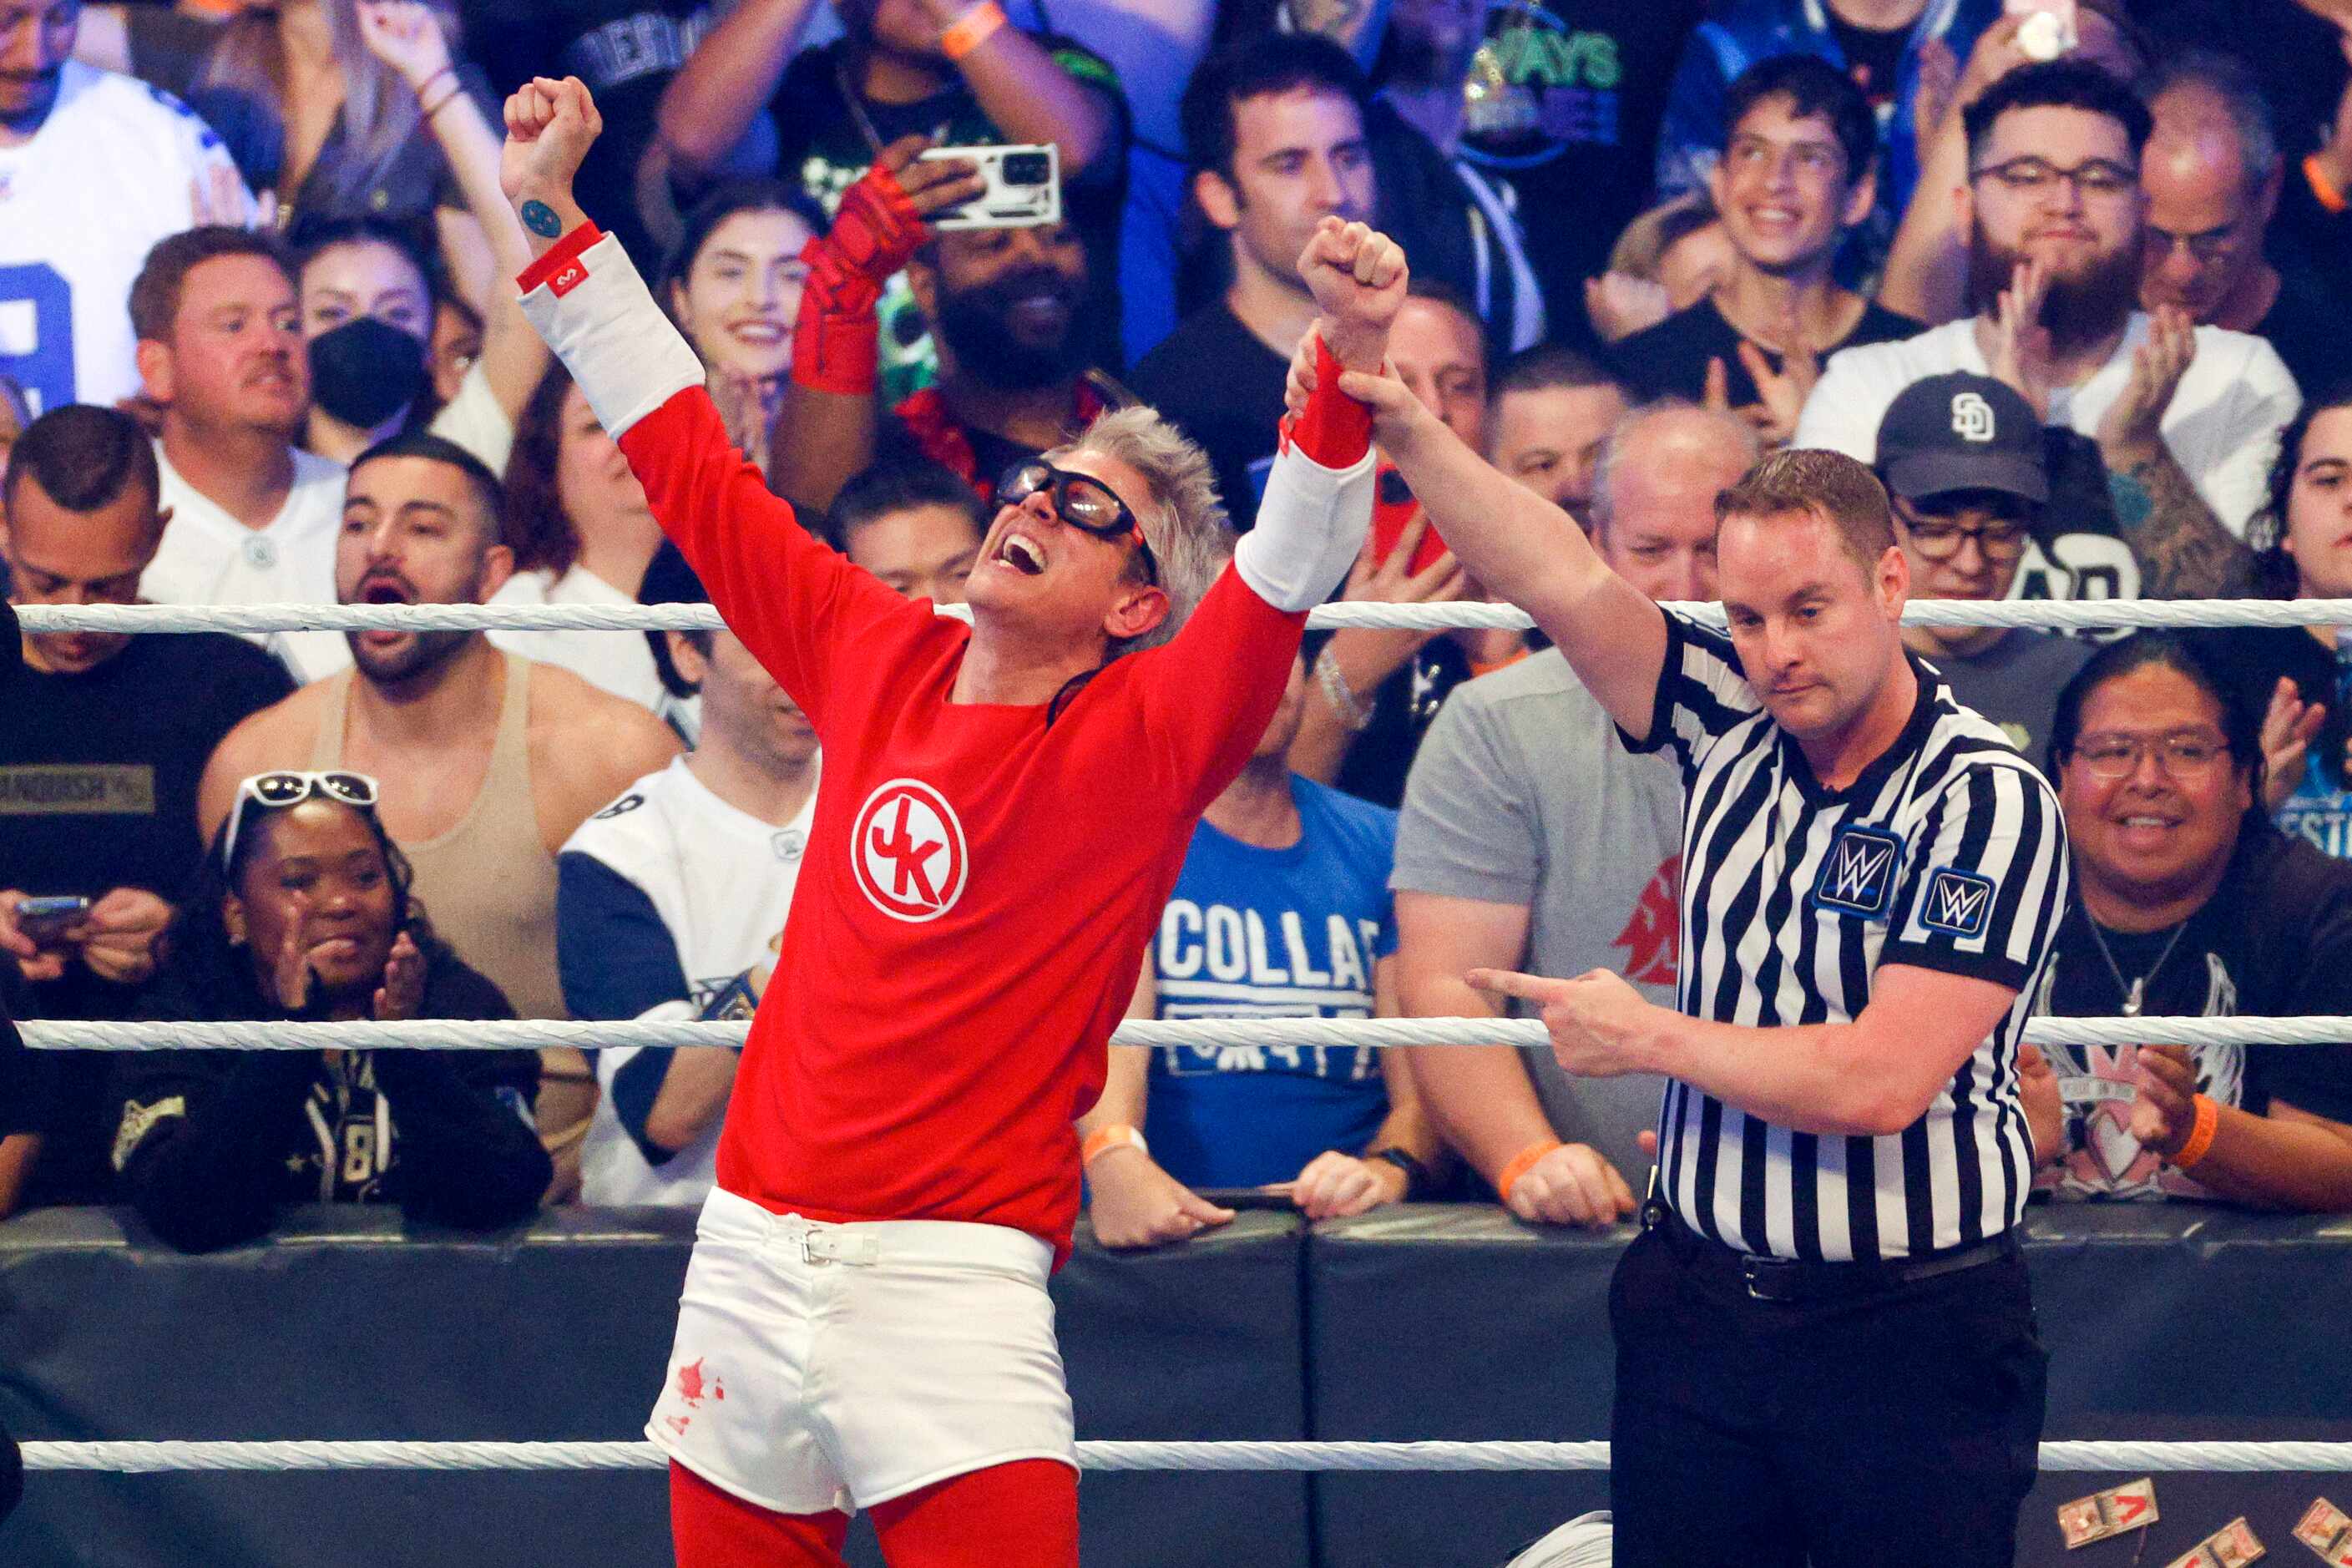 Johnny Knoxville raises his arms in victory after a match against Sami Zayn at WrestleMania...